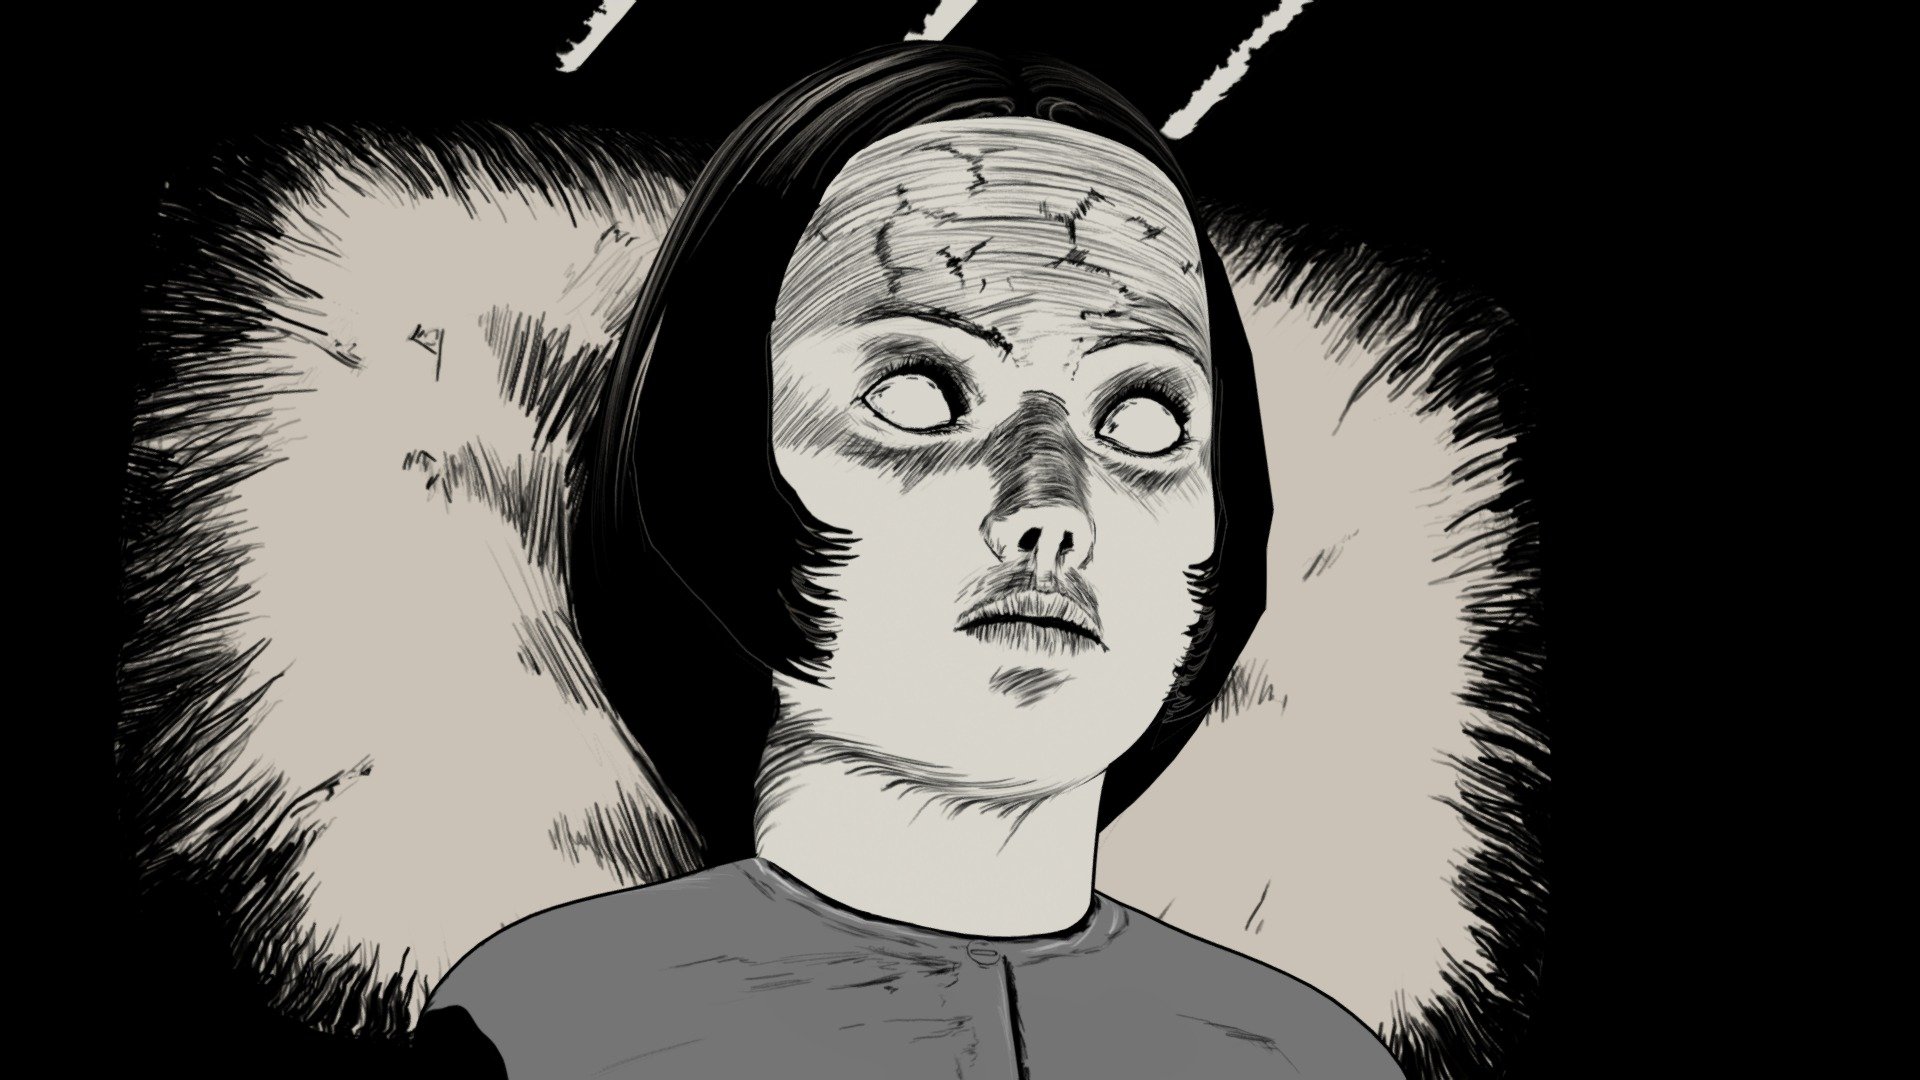 This is pretty much a quick test of a project I want to try doing in the near future. Just a panel from one of my favorite manga series by Junji Ito I built this morning. I hope you guys dig it even though it is a little weird and spooky HAHA be cool.

please support the author

and check out my artstation for more intresting work
https://www.artstation.com/seanwcgi - Long Dream - Junji Ito - 3D model by Sean Wade (@SeanWcgi) 3d model